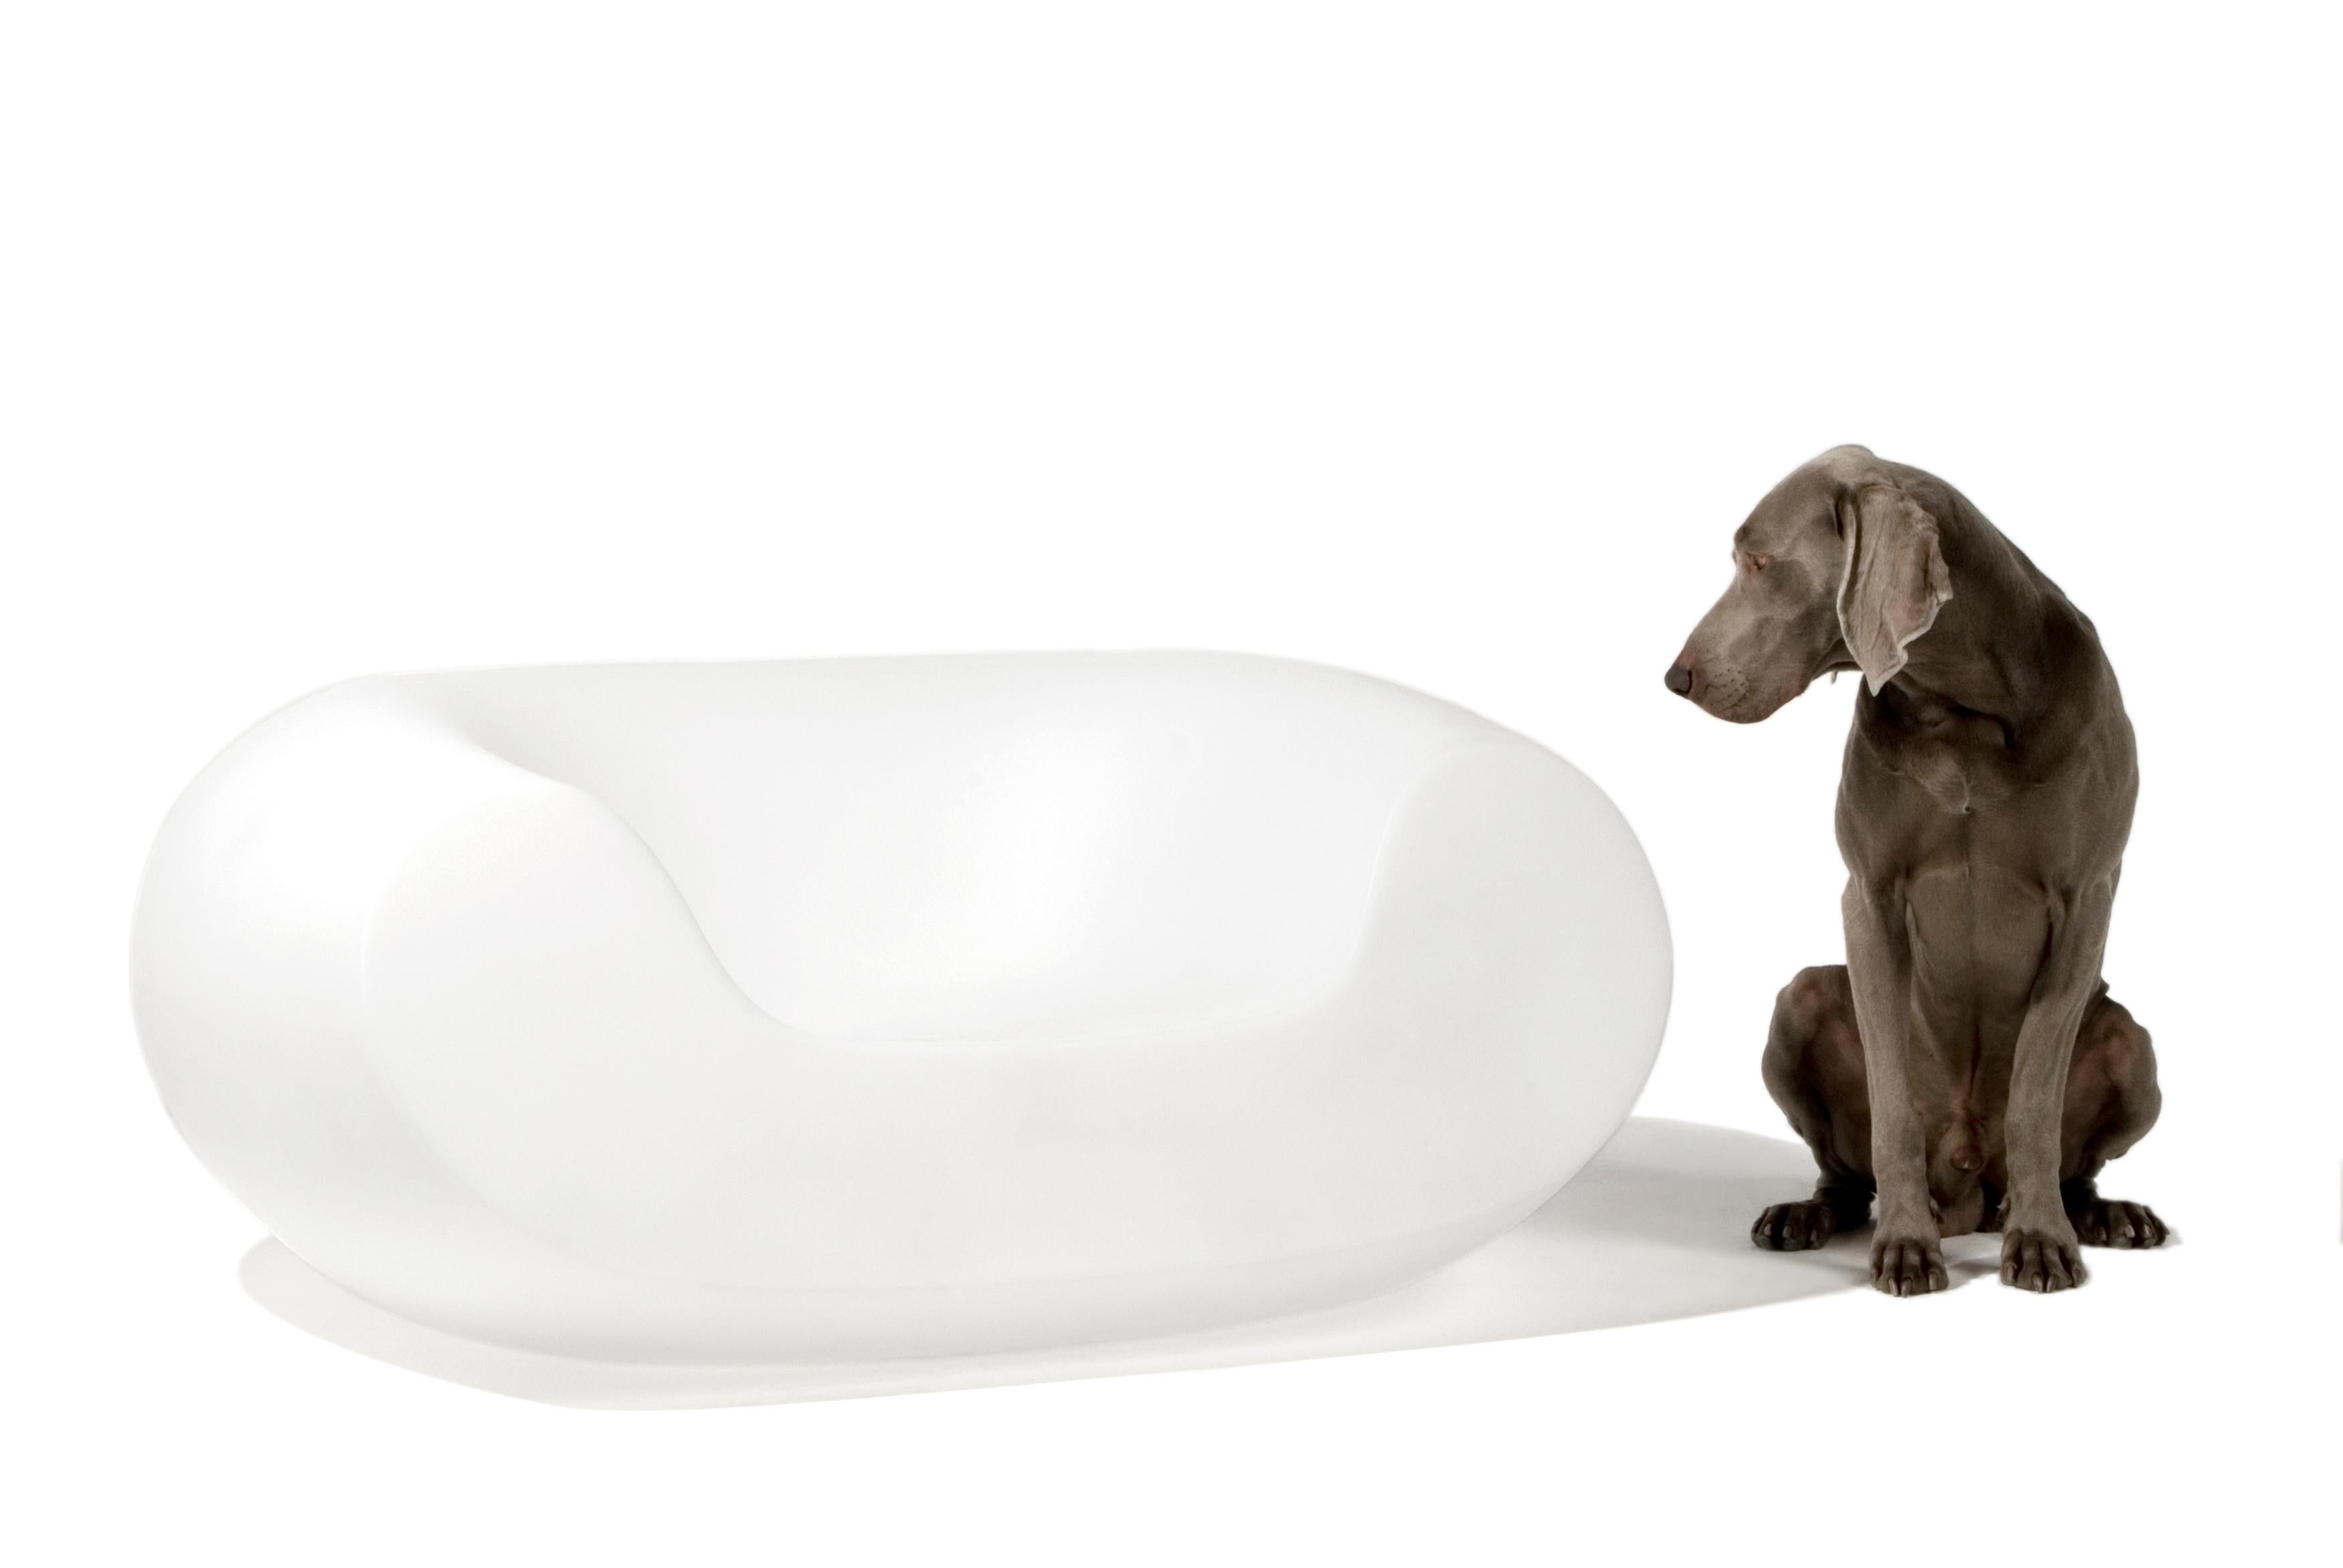 Flammenroter Chubby Loungesessel von Marcel Wanders im Angebot 1